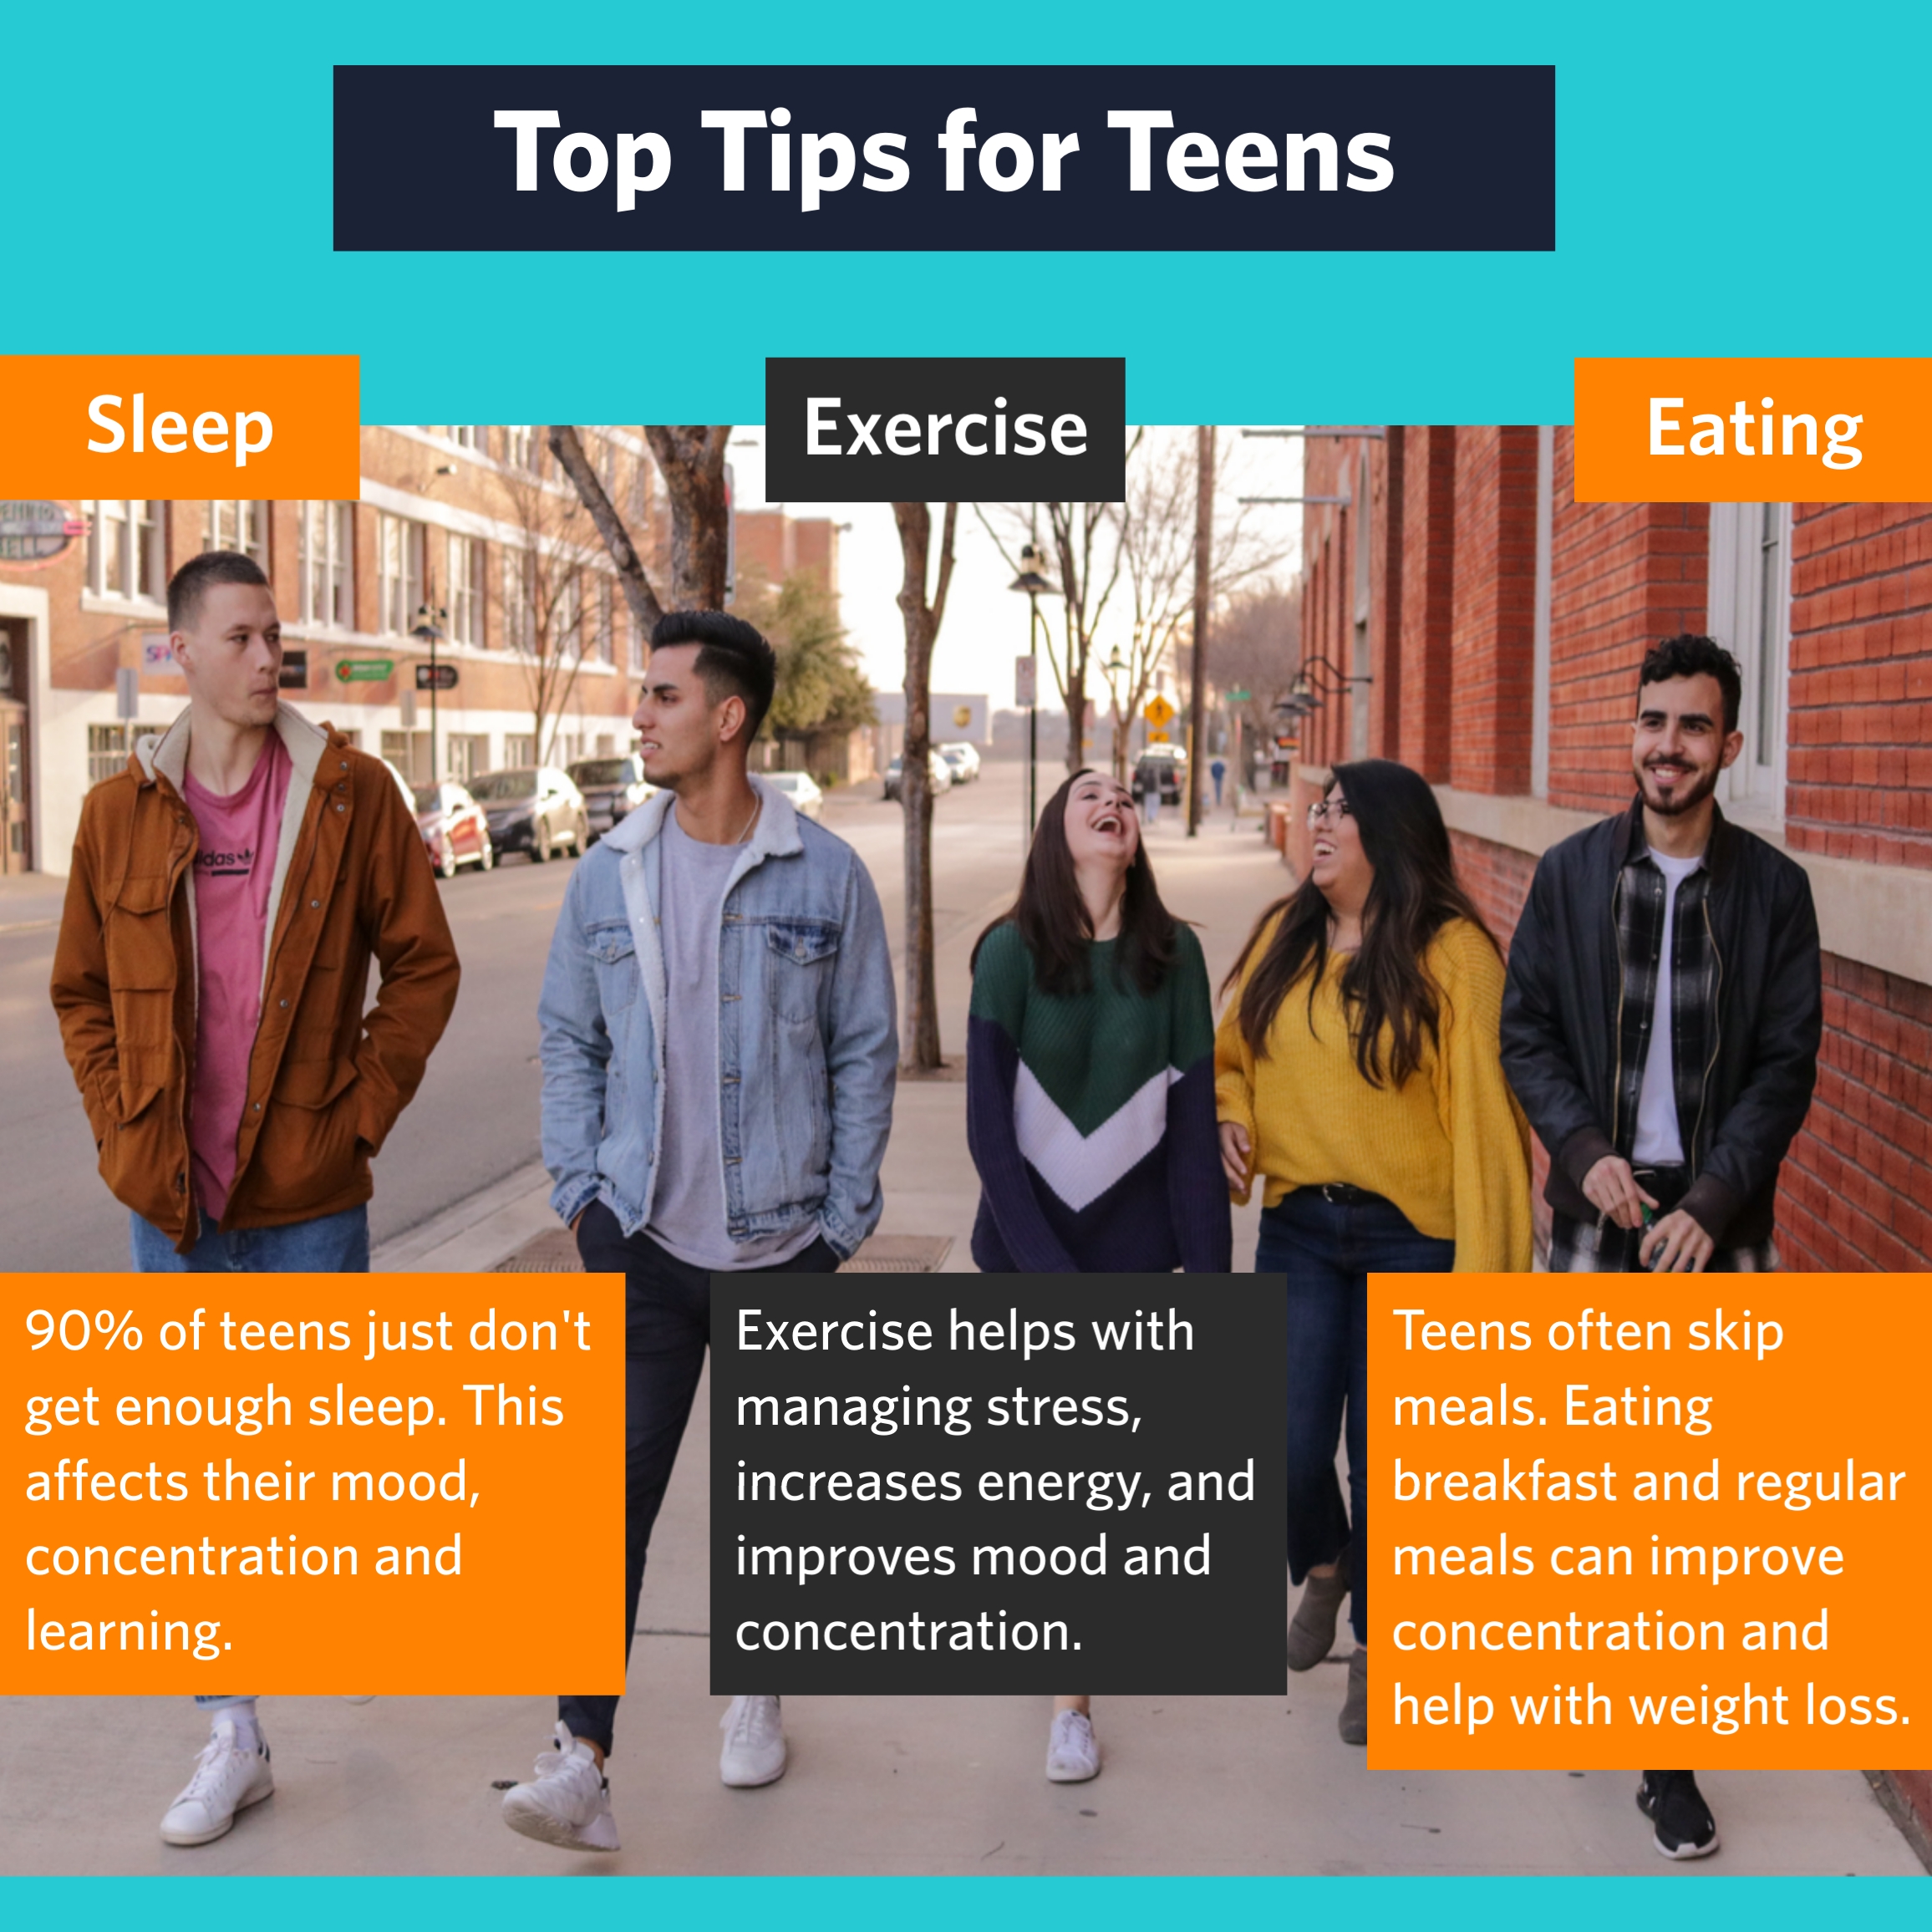 Teen tips for growing healthy kids in south west sydney